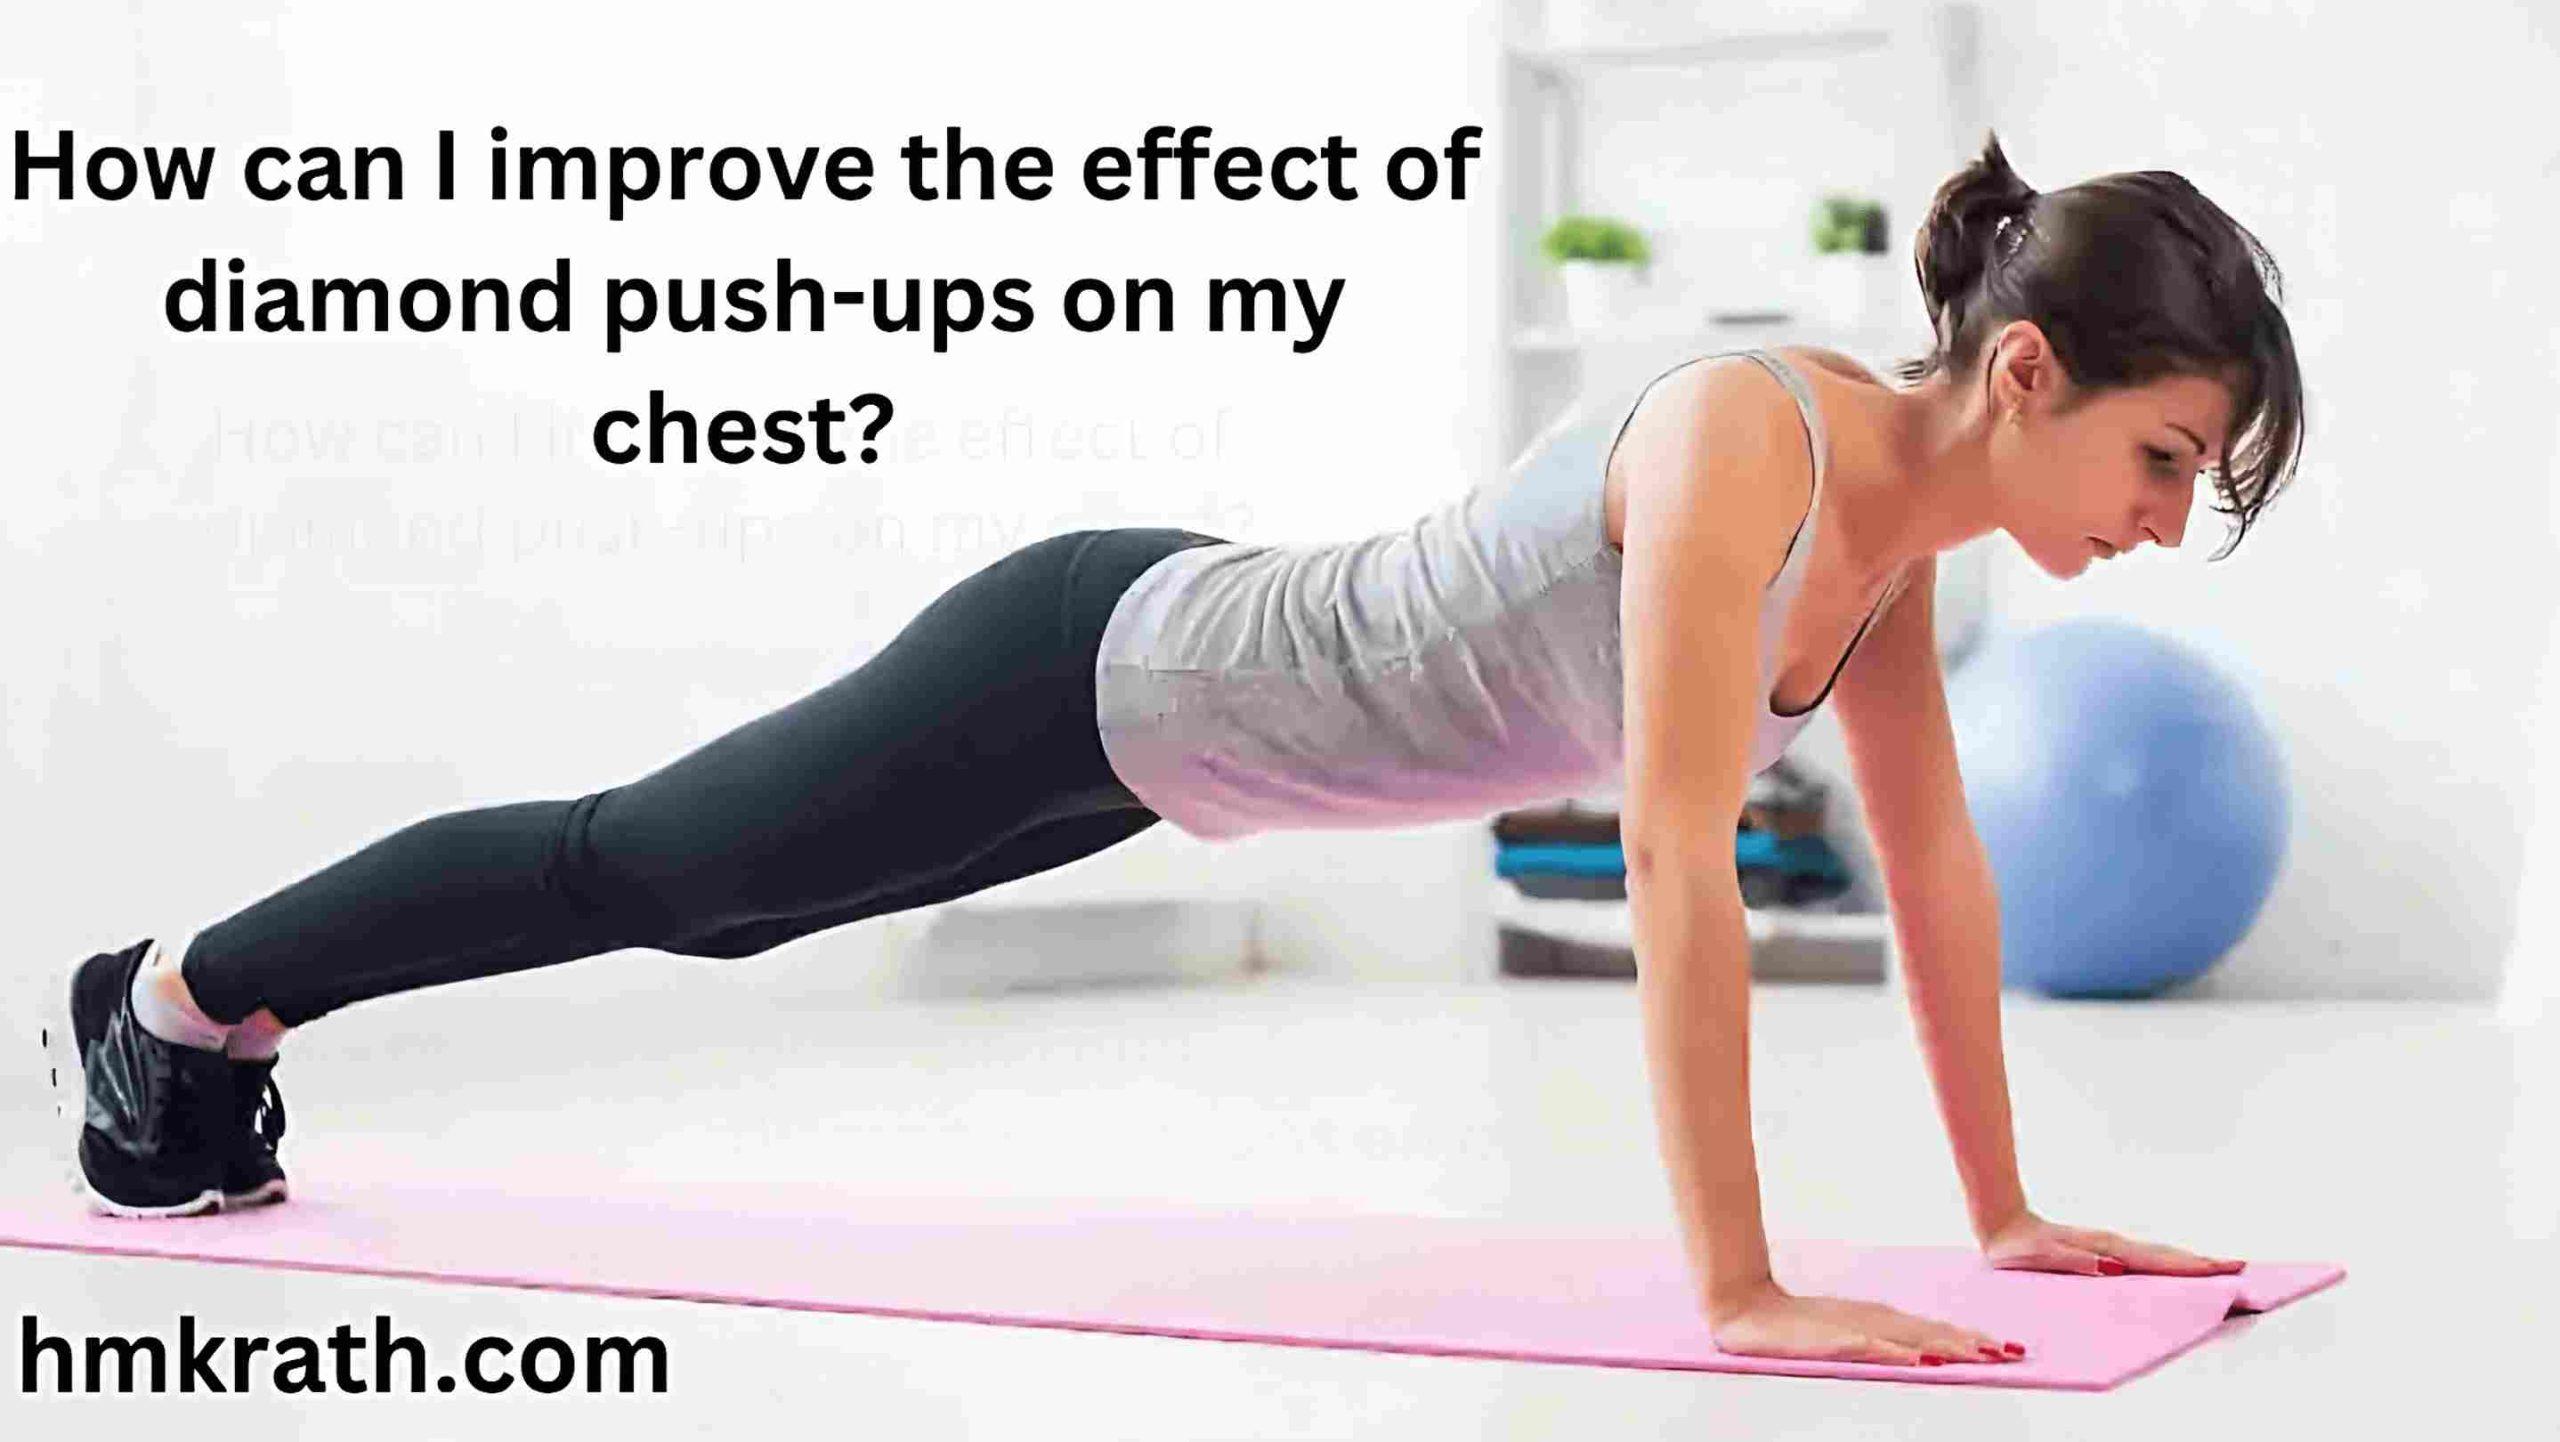 How can I improve the effect of diamond push-ups on my chest